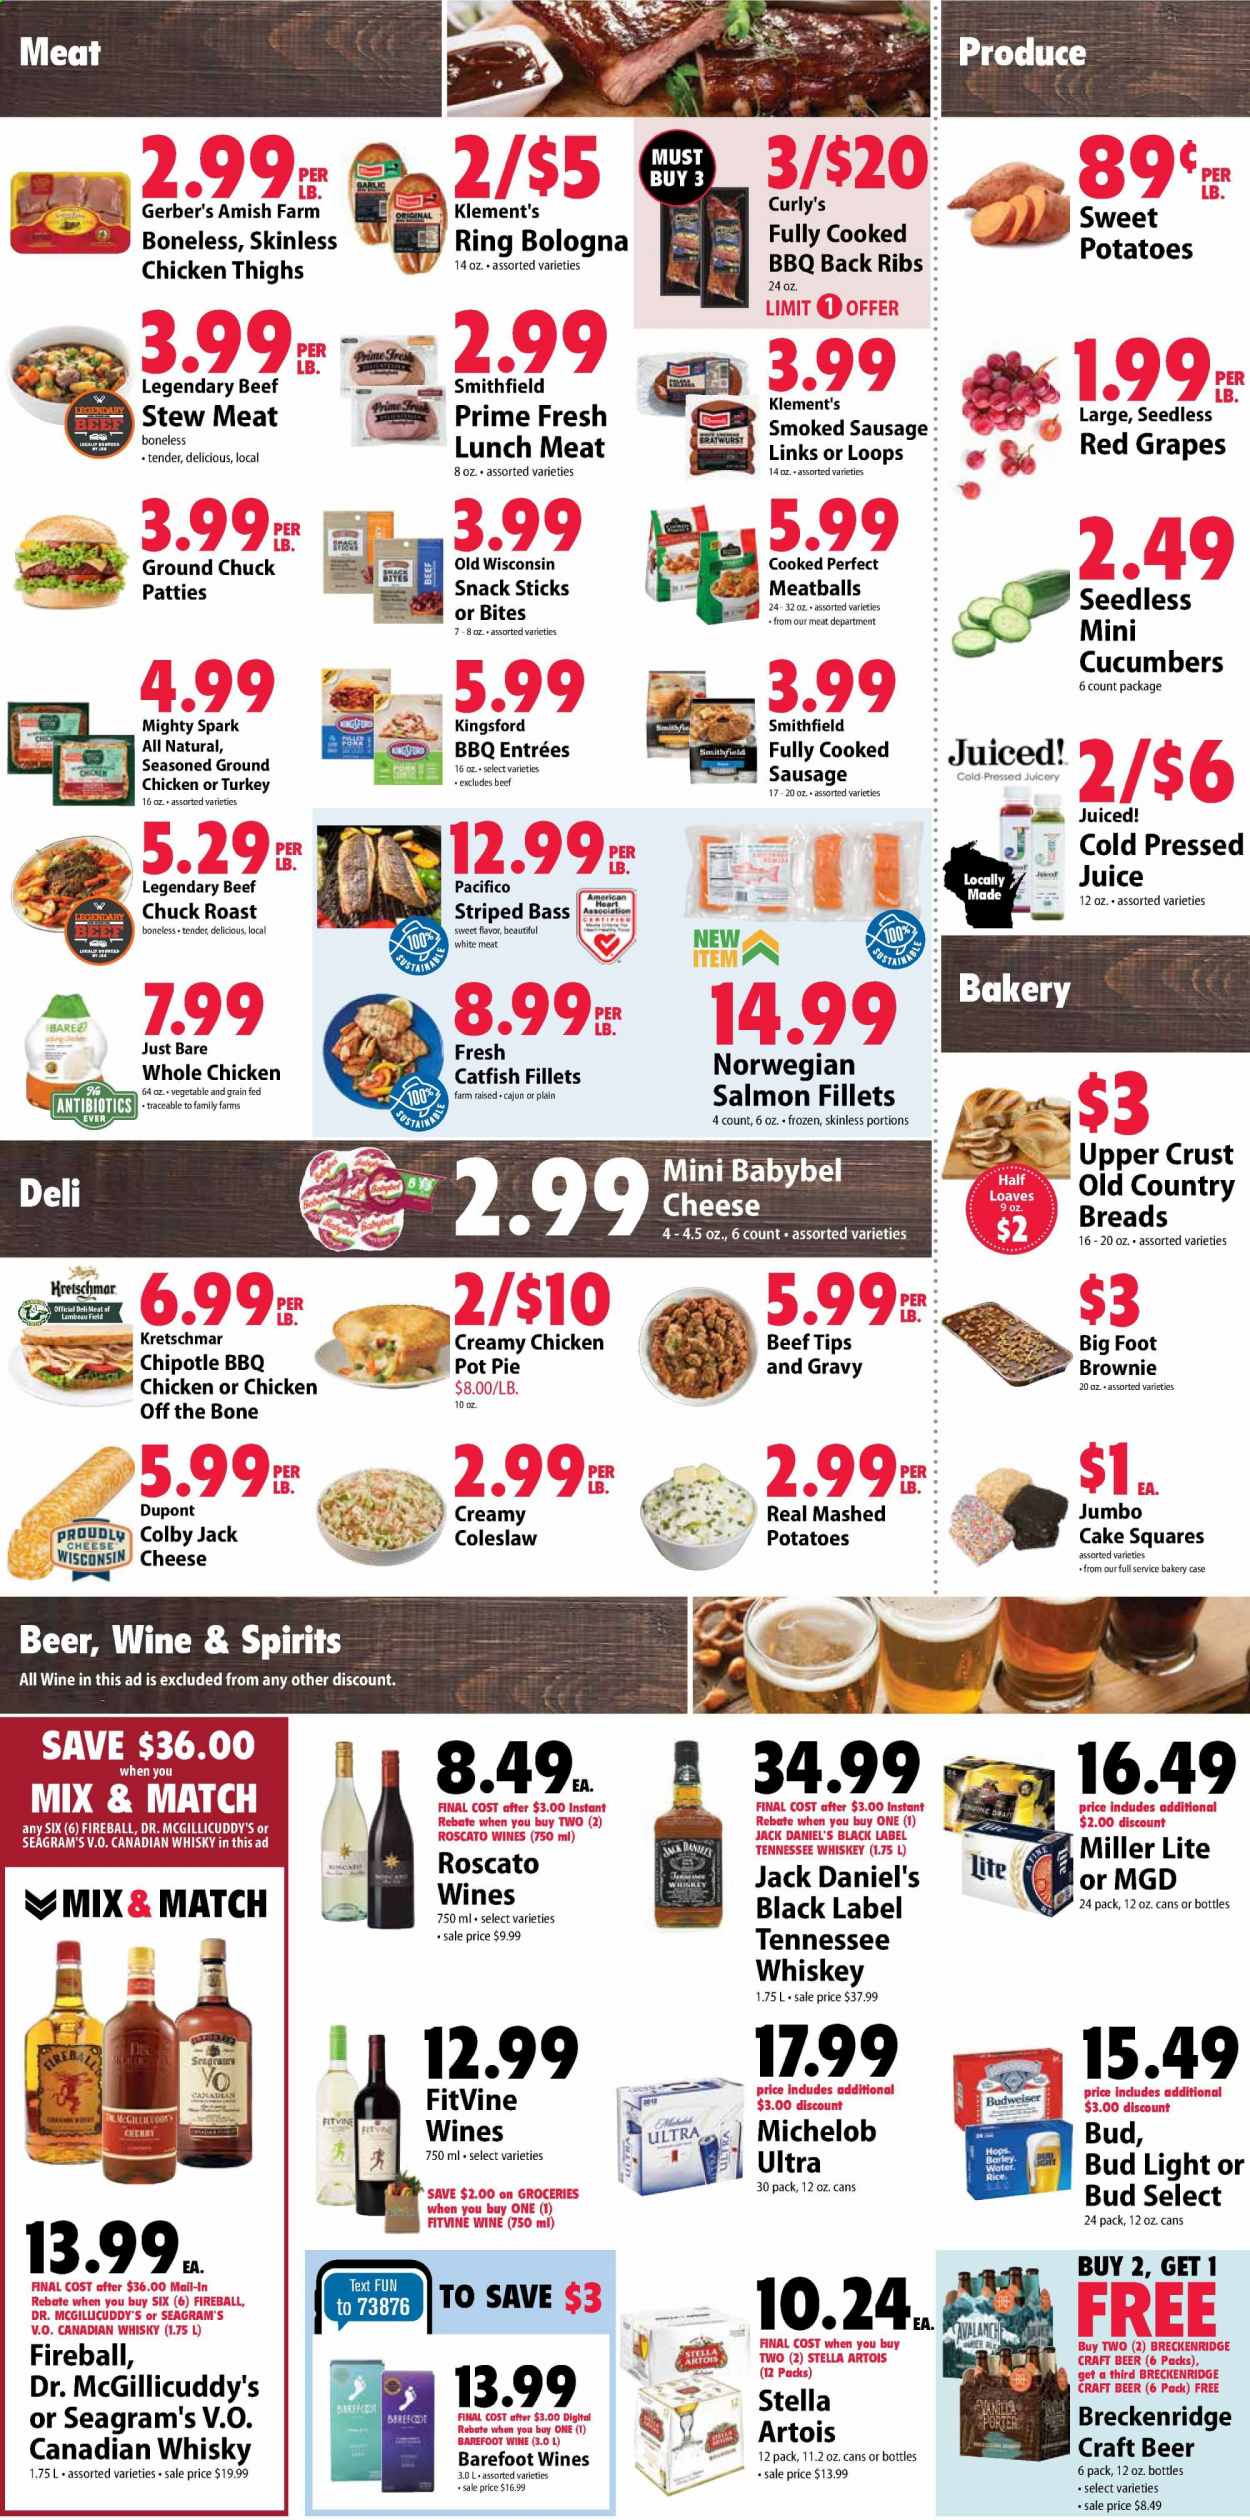 thumbnail - Festival Foods Flyer - 01/20/2021 - 01/26/2021 - Sales products - stew meat, cake squares, pot pie, cake, pie, brownies, catfish, salmon, salmon fillet, coleslaw, Jack Daniel's, meatballs, bologna sausage, sausage, smoked sausage, lunch meat, Colby cheese, cheese, Babybel, sweet potato, Gerber, snack, cucumber, garlic, juice, wine, canadian whisky, Tennessee Whiskey, whiskey, whisky, beer, Budweiser, Miller Lite, Stella Artois, Michelob, Bud Light, whole chicken, chicken thighs, beef meat, ground chuck, chuck roast, grapes. Page 2.